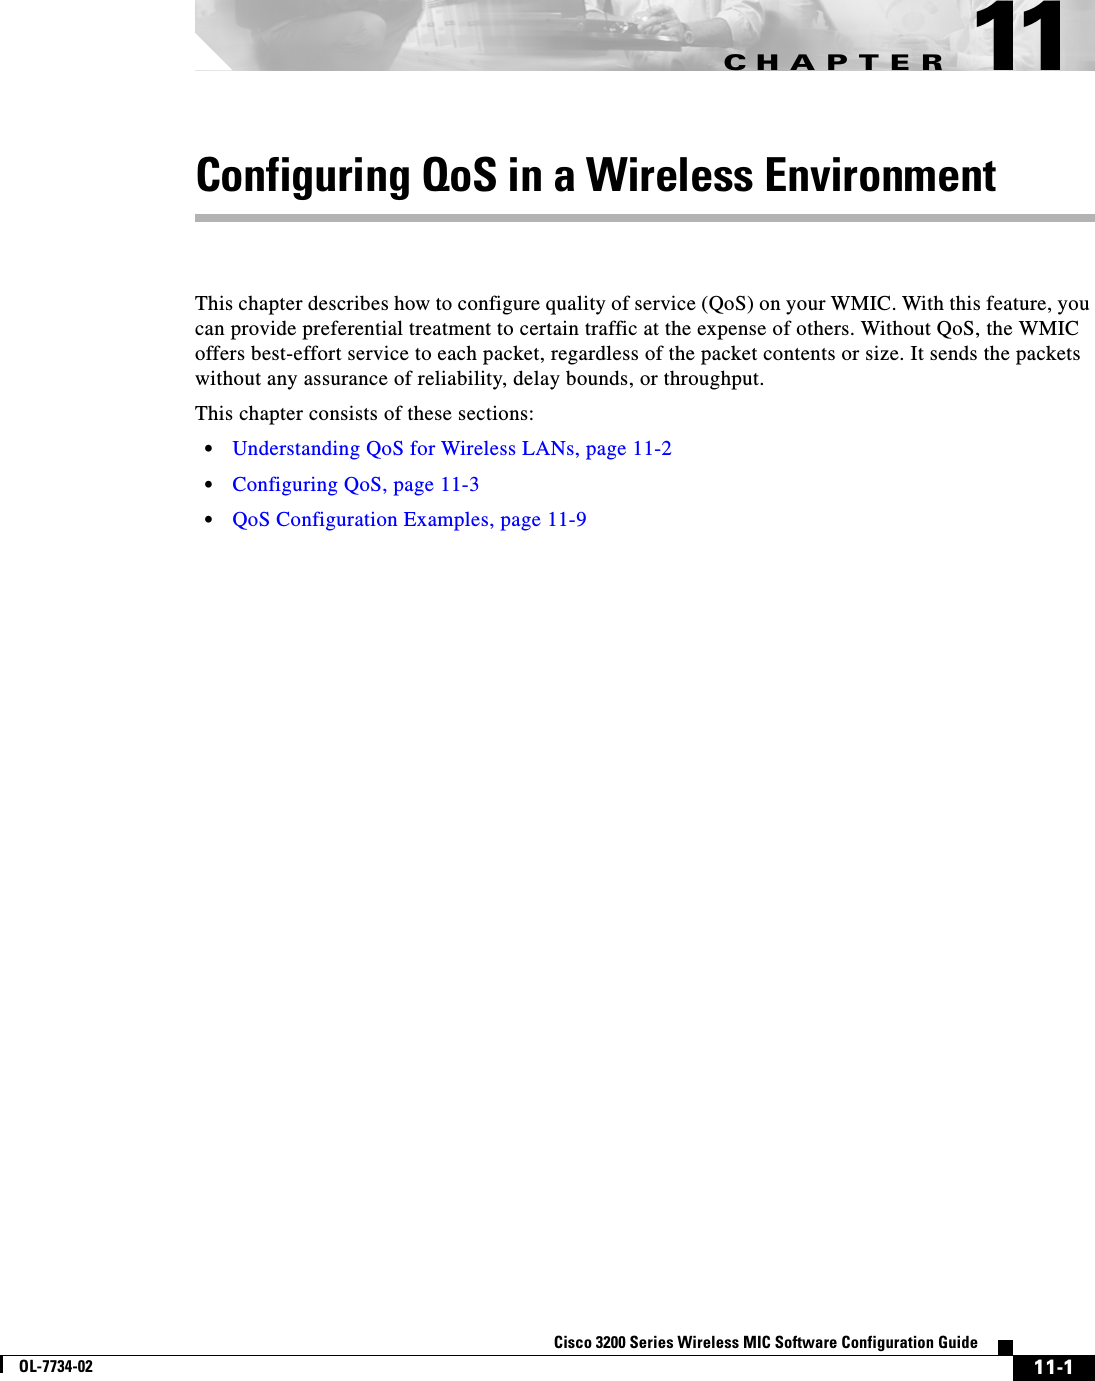 CHAPTER11-1Cisco 3200 Series Wireless MIC Software Configuration GuideOL-7734-0211Configuring QoS in a Wireless EnvironmentThis chapter describes how to configure quality of service (QoS) on your WMIC. With this feature, you can provide preferential treatment to certain traffic at the expense of others. Without QoS, the WMIC offers best-effort service to each packet, regardless of the packet contents or size. It sends the packets without any assurance of reliability, delay bounds, or throughput.This chapter consists of these sections:•Understanding QoS for Wireless LANs, page 11-2•Configuring QoS, page 11-3•QoS Configuration Examples, page 11-9